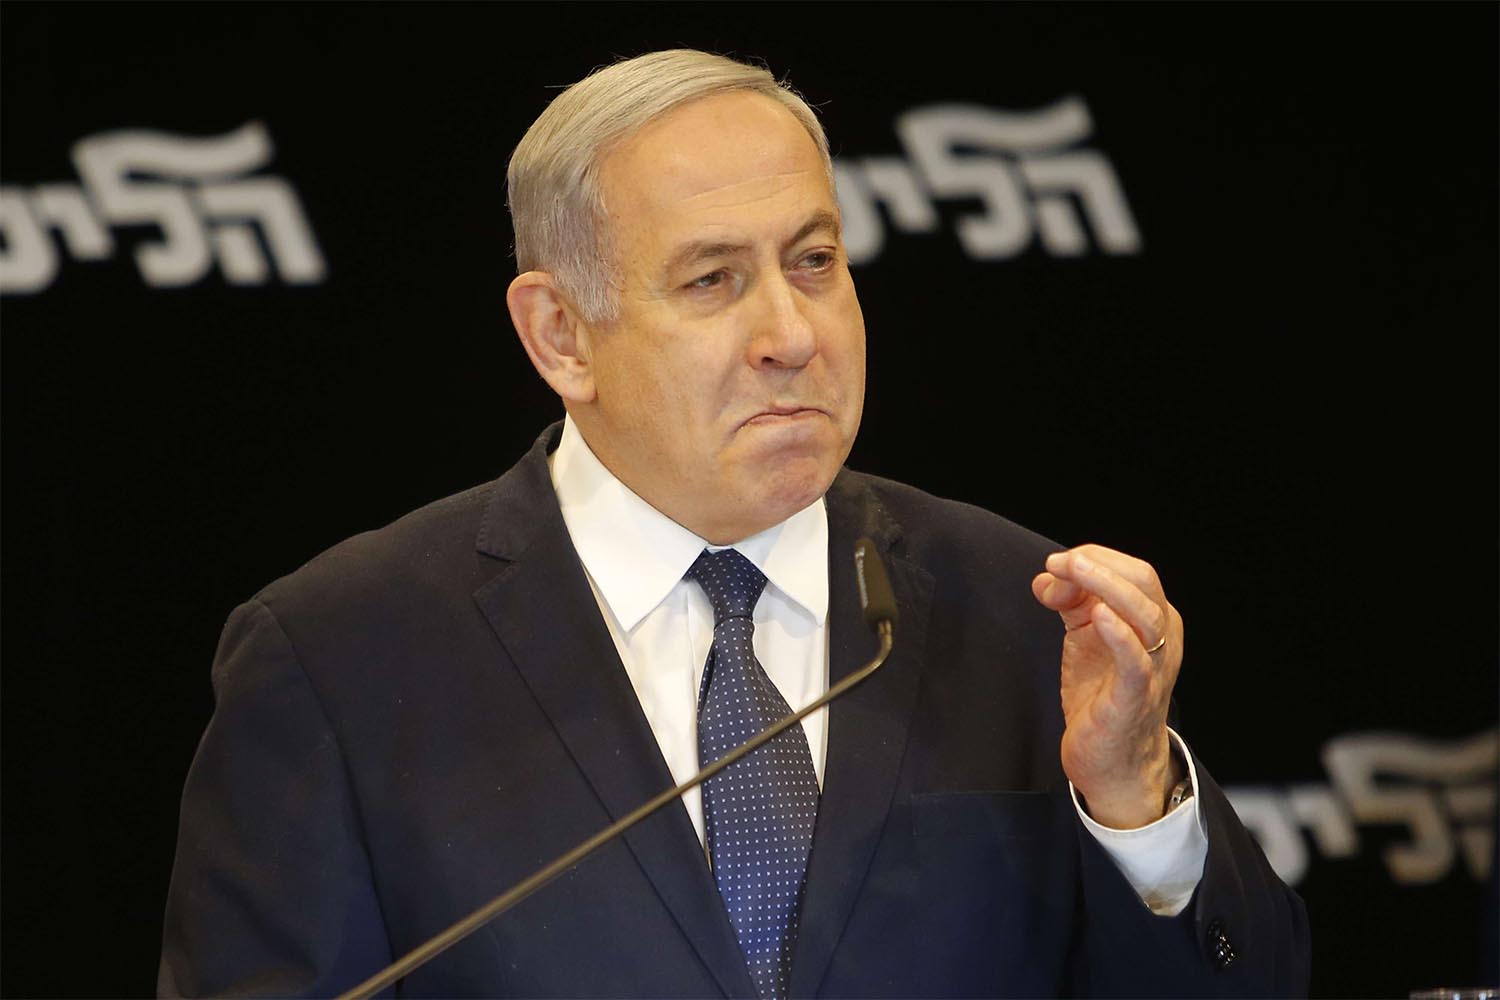 Netanyahu was charged in November with bribery, fraud and breach of trust in three separate corruption cases